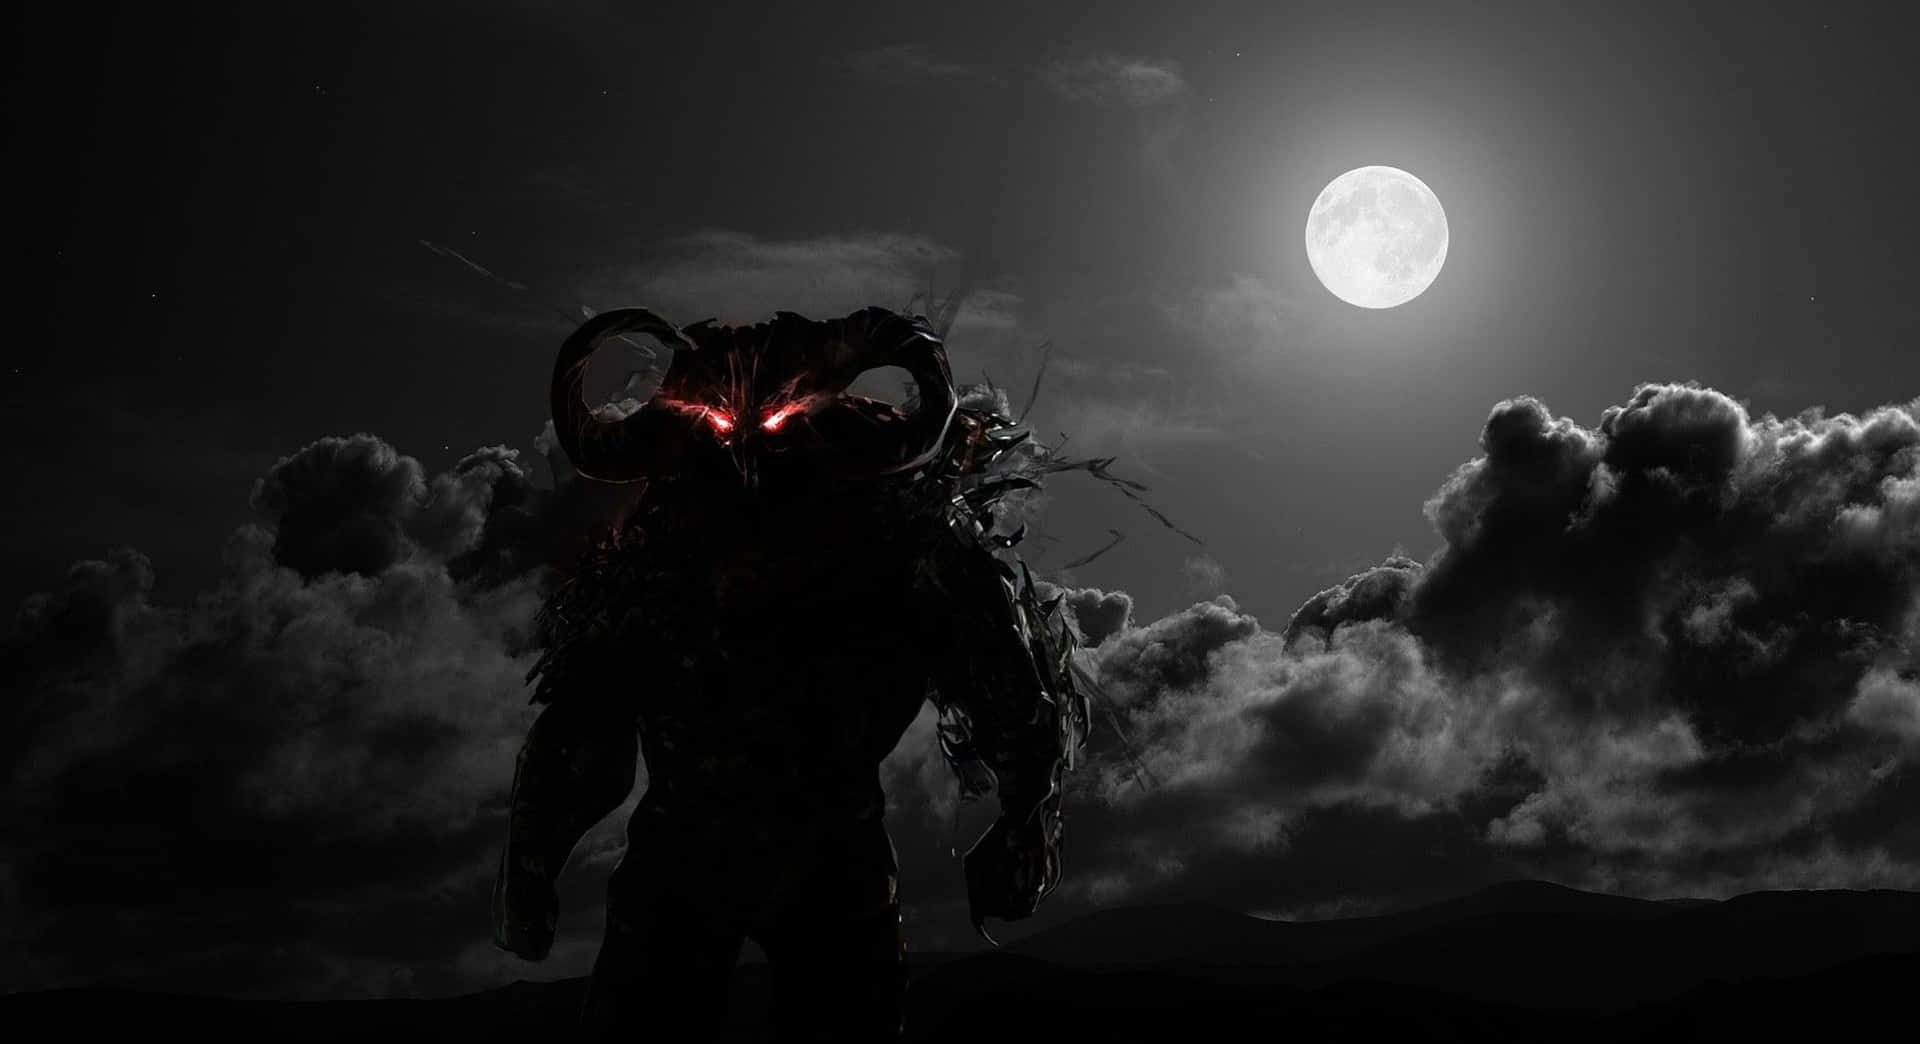 A Demon Standing In The Dark With A Full Moon